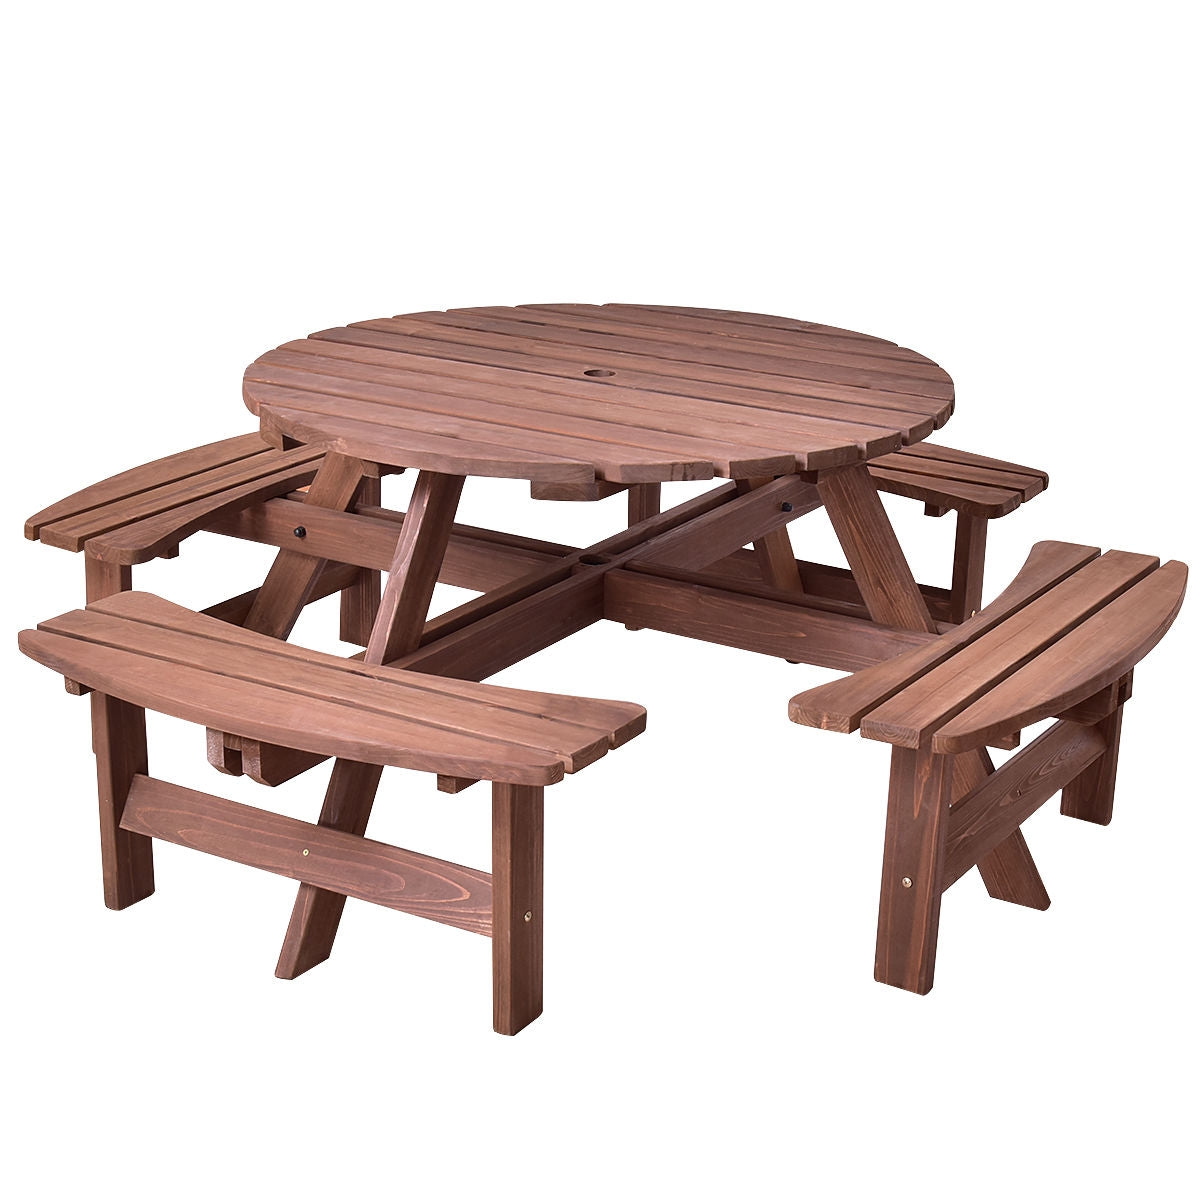 Hikidspace 8 Seater Wooden Dining Table Chair Set for Picnic